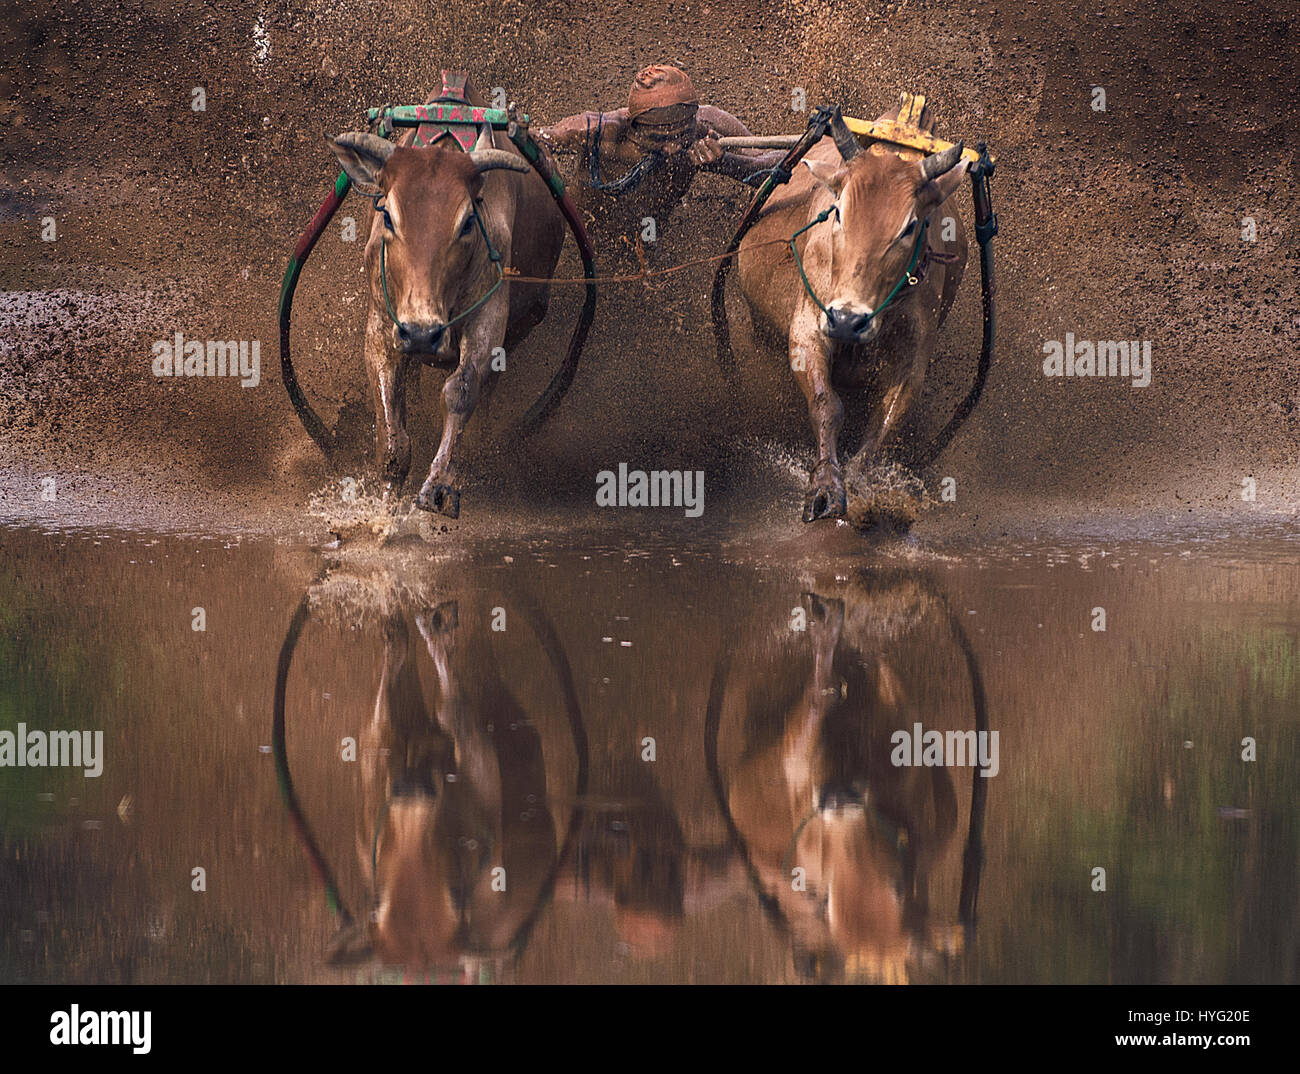 BATU SANGKAR, INDONESIA: SPECTACULAR images of farmers racing their prize bulls through mud will set your pulse racing. Pictures show how the brave competitors in this seasonal race will stop at nothing to prove the strength of their bulls and their skill in racing them through the most difficult terrain. Malaysian photographer Mohd Irman Ismail took the pictures during the Pacu Jawi festival in Batu Sangkar, West Sumatra , Indonesia. Stock Photo